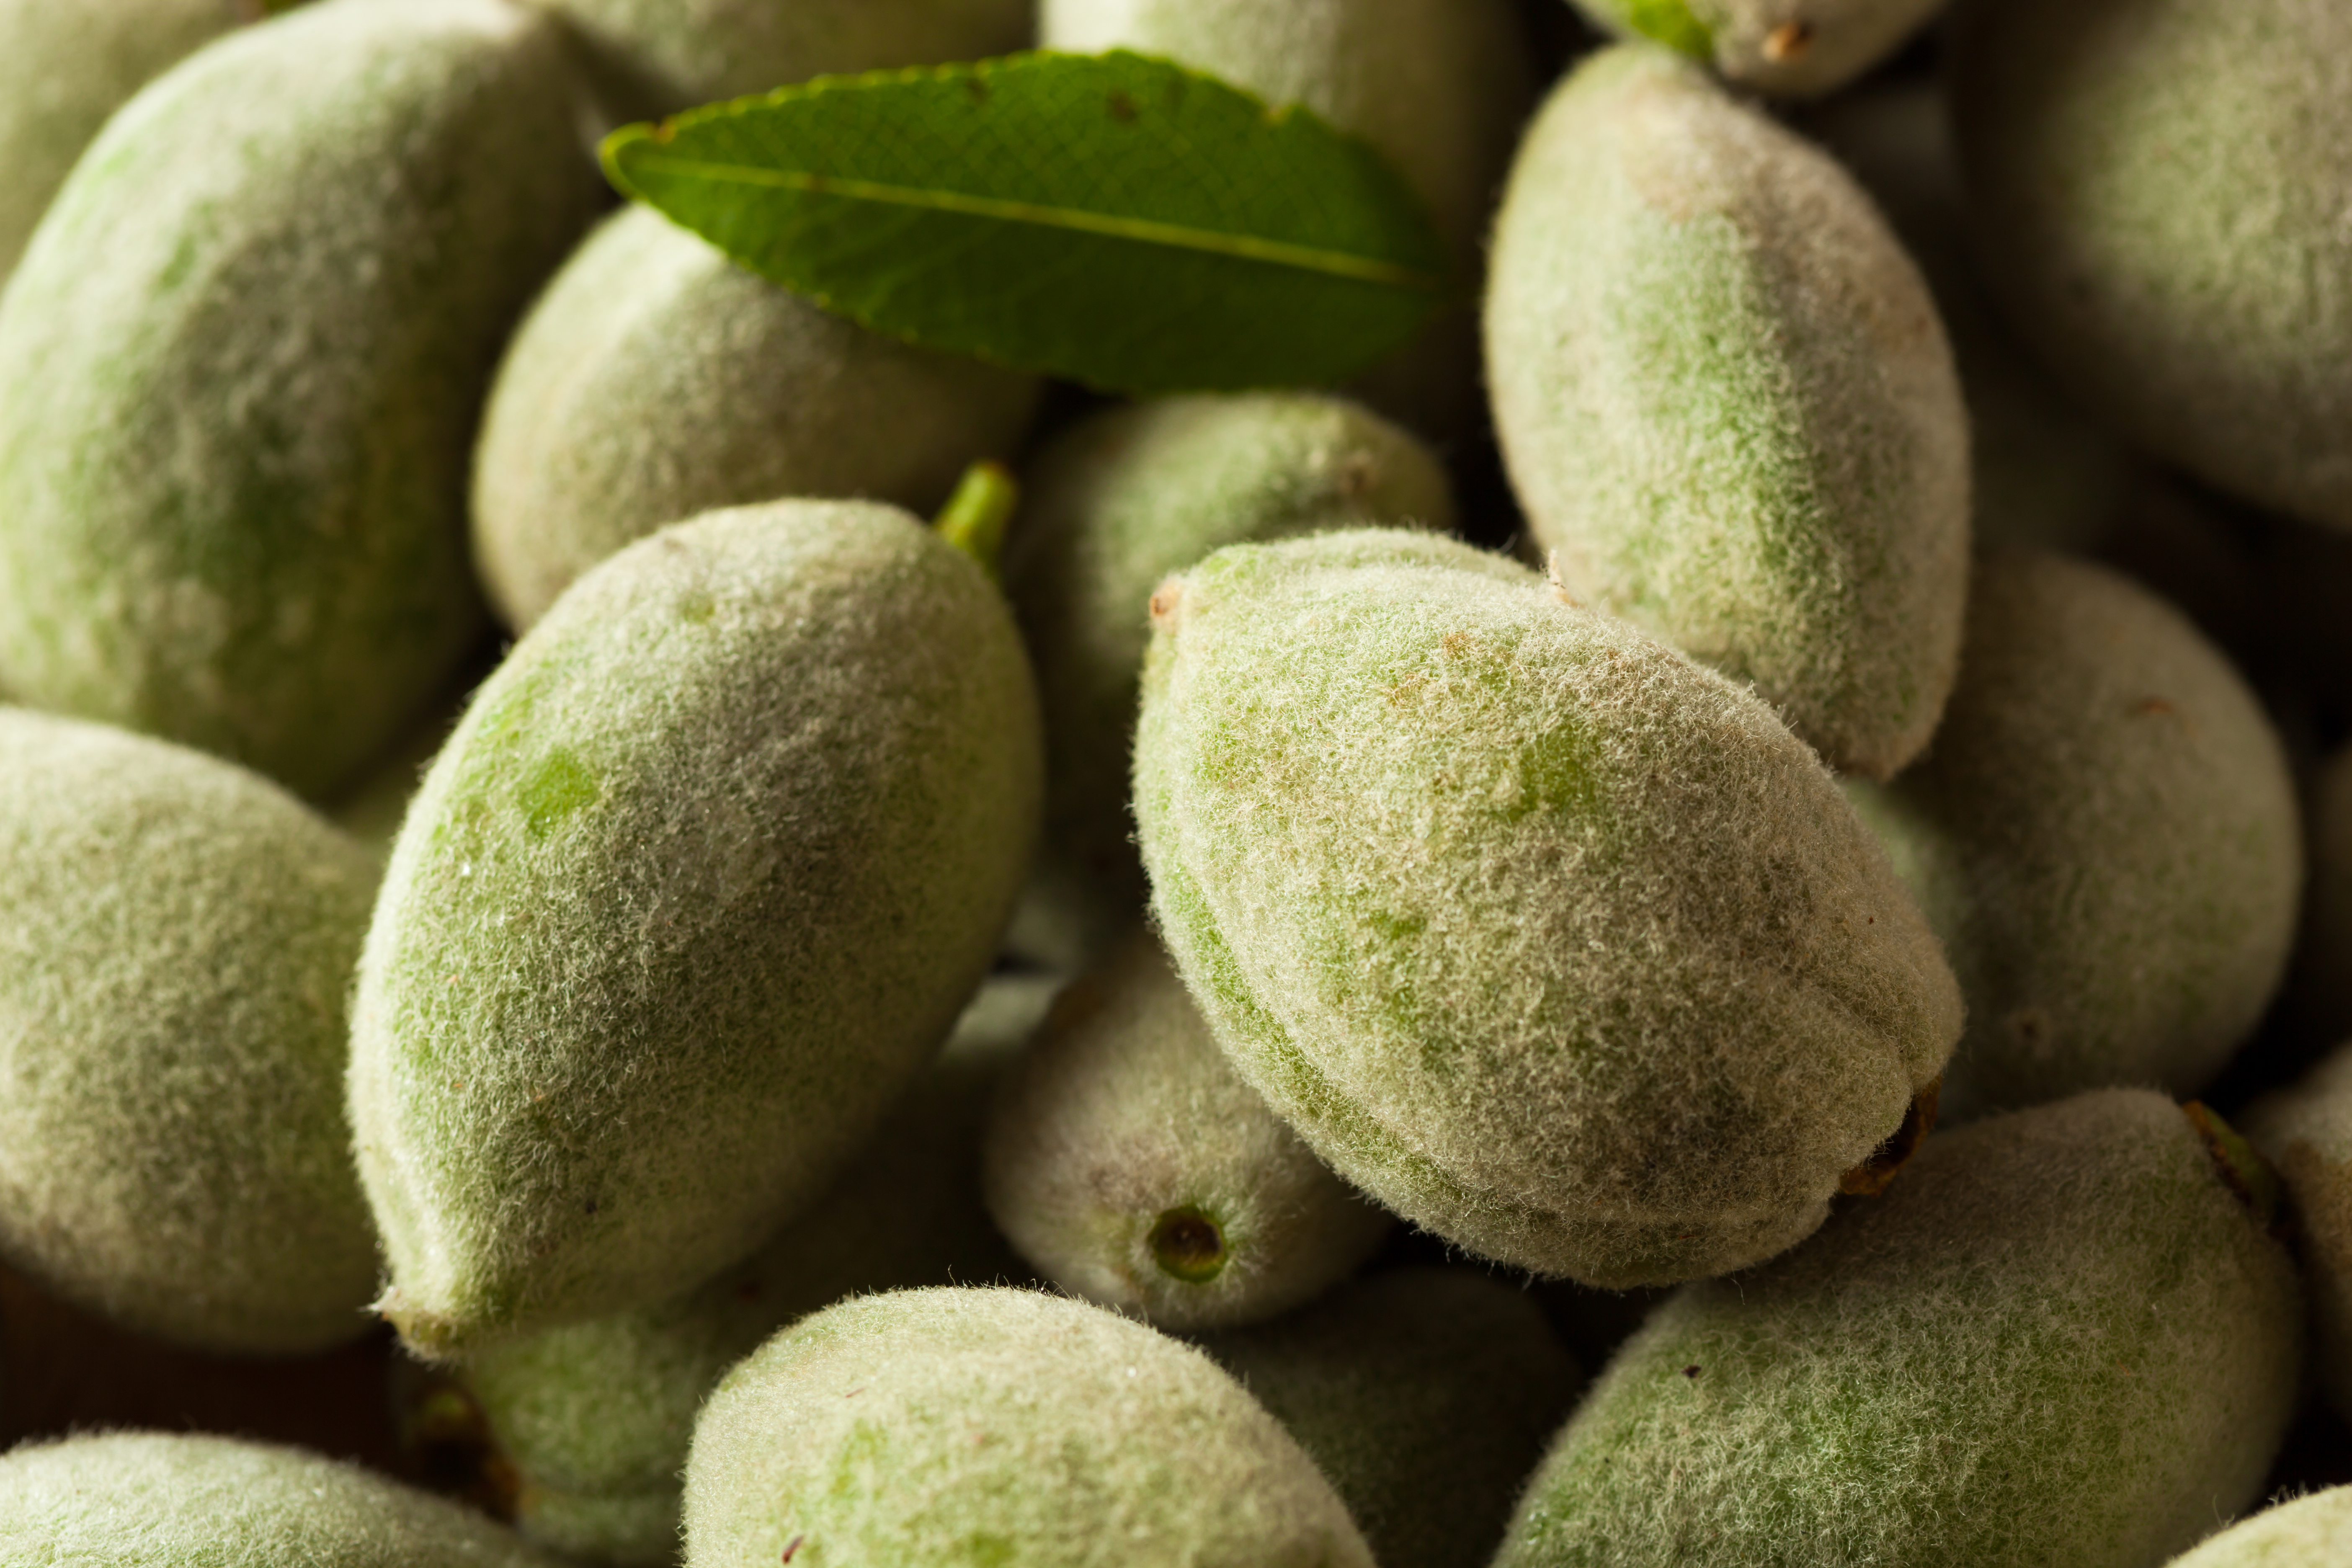 Nutritional Benefits of Green Almonds